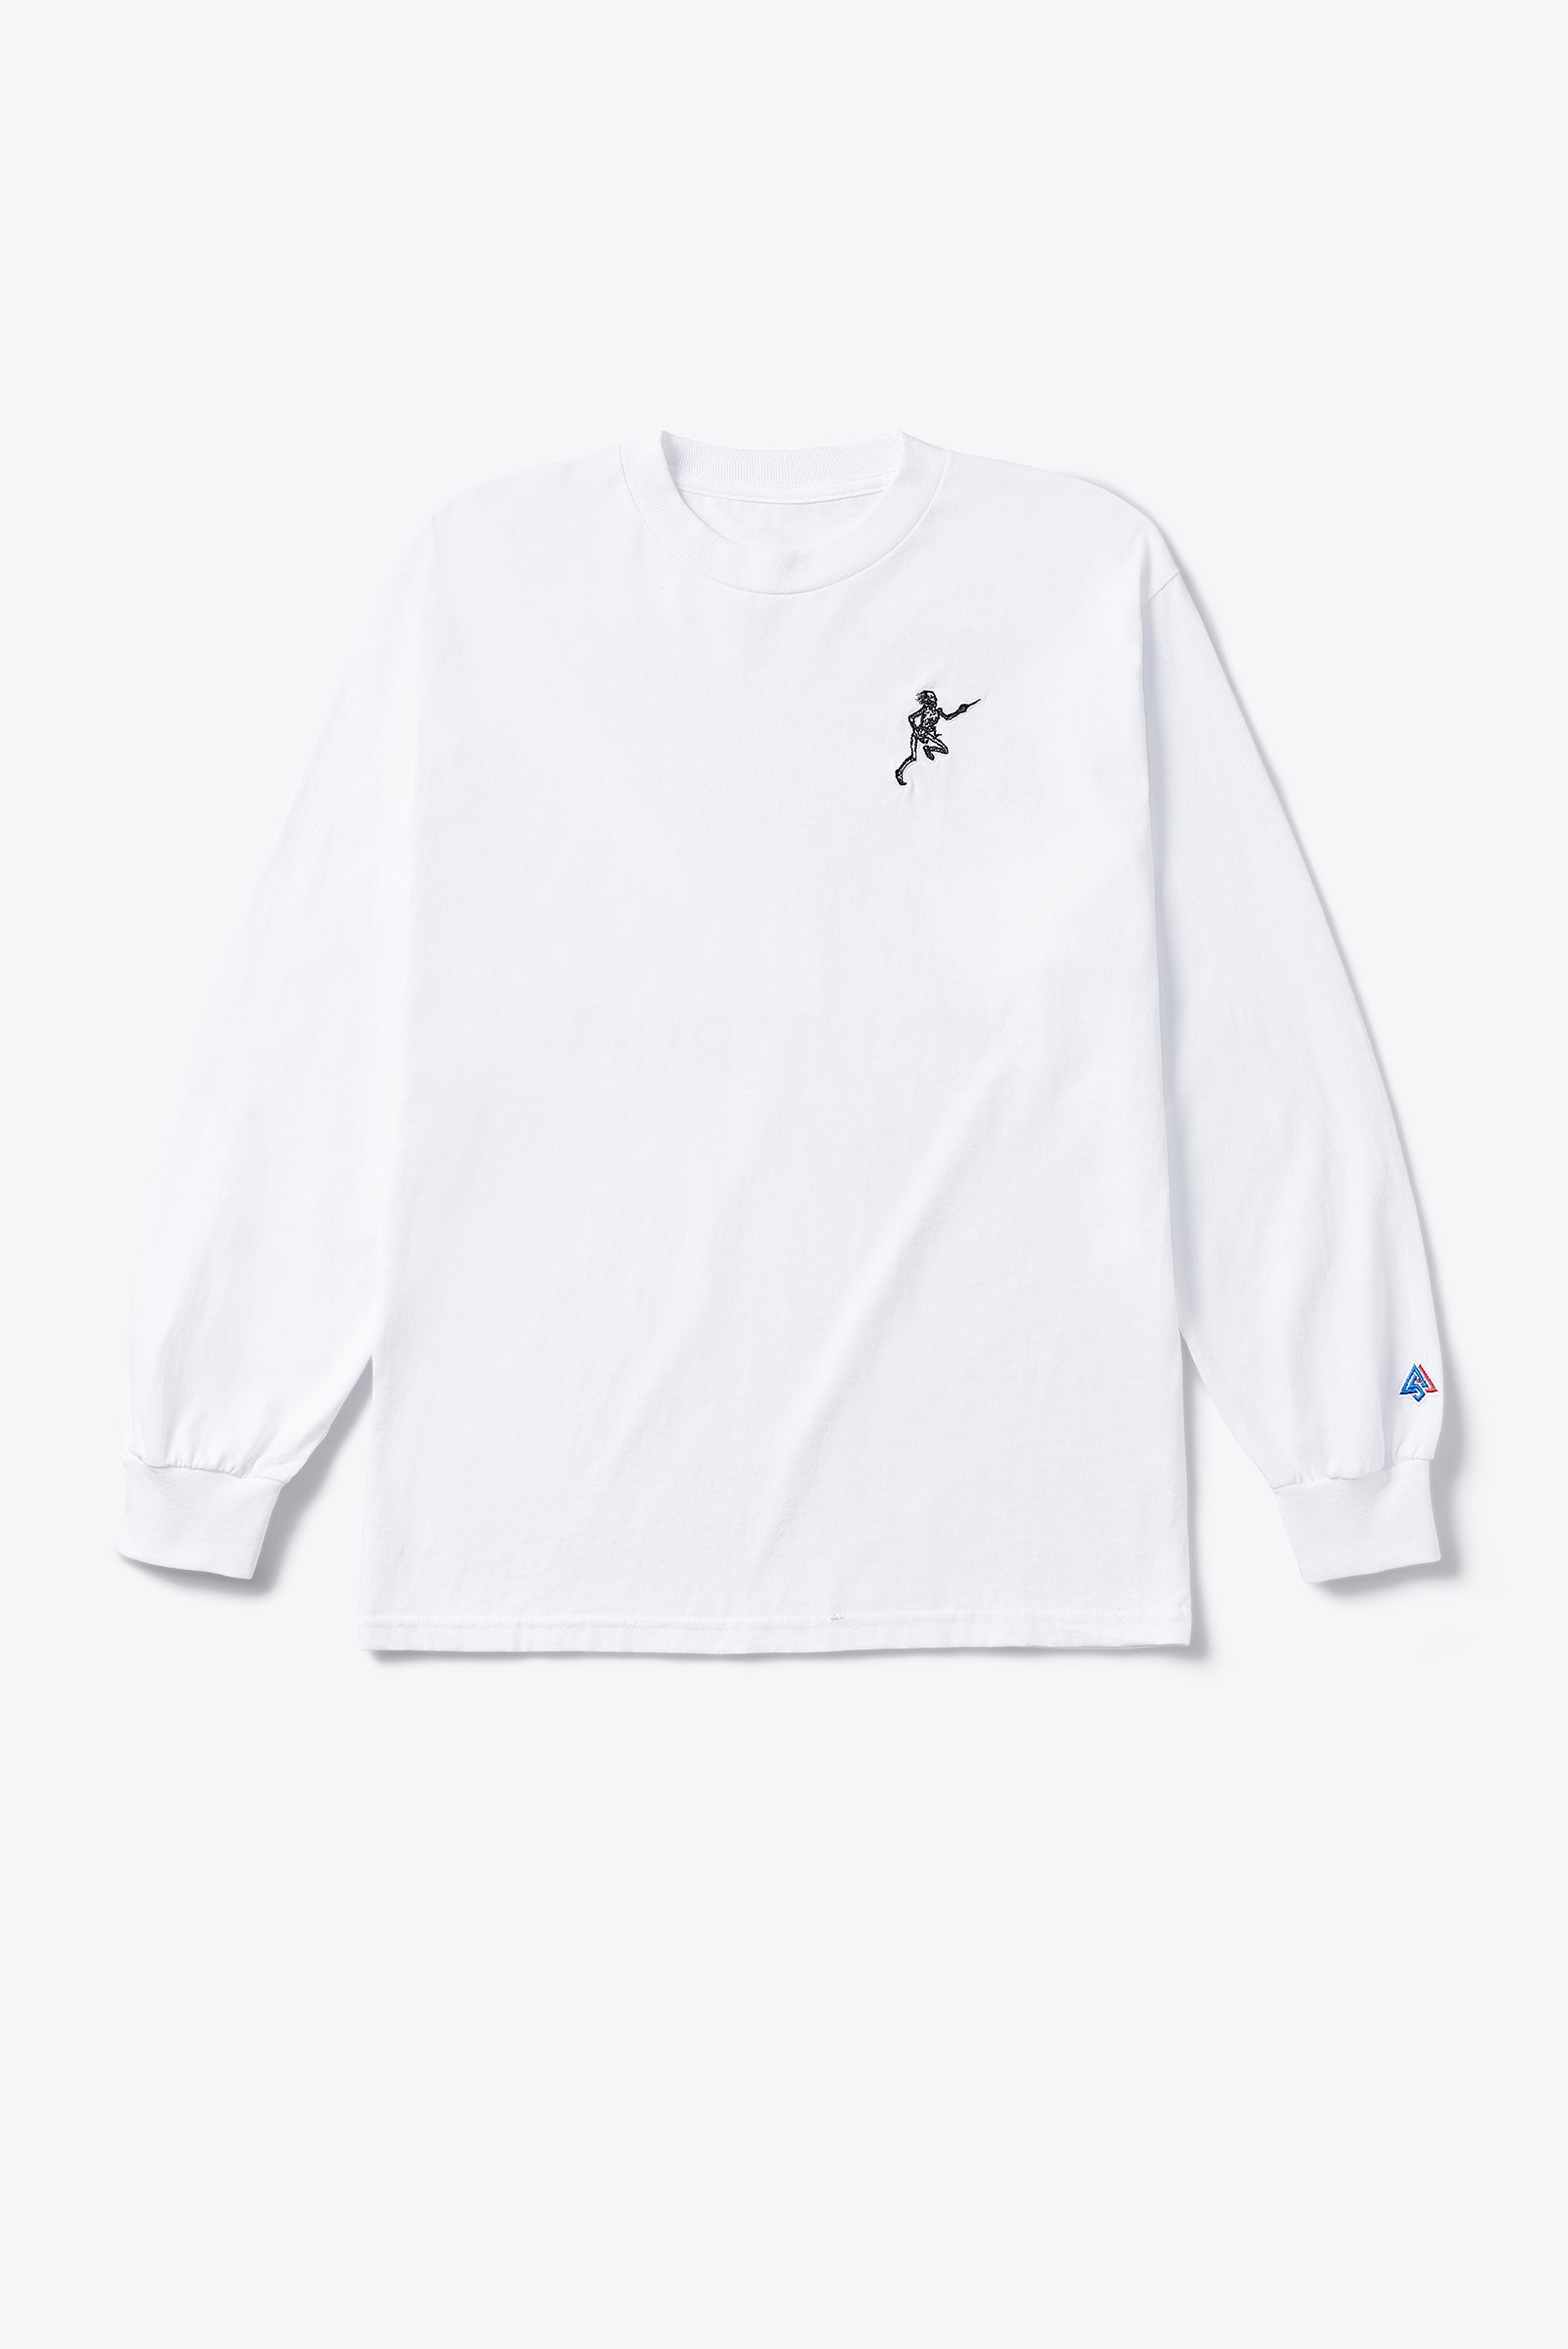 DualForces x Black Triangle Long Sleeve